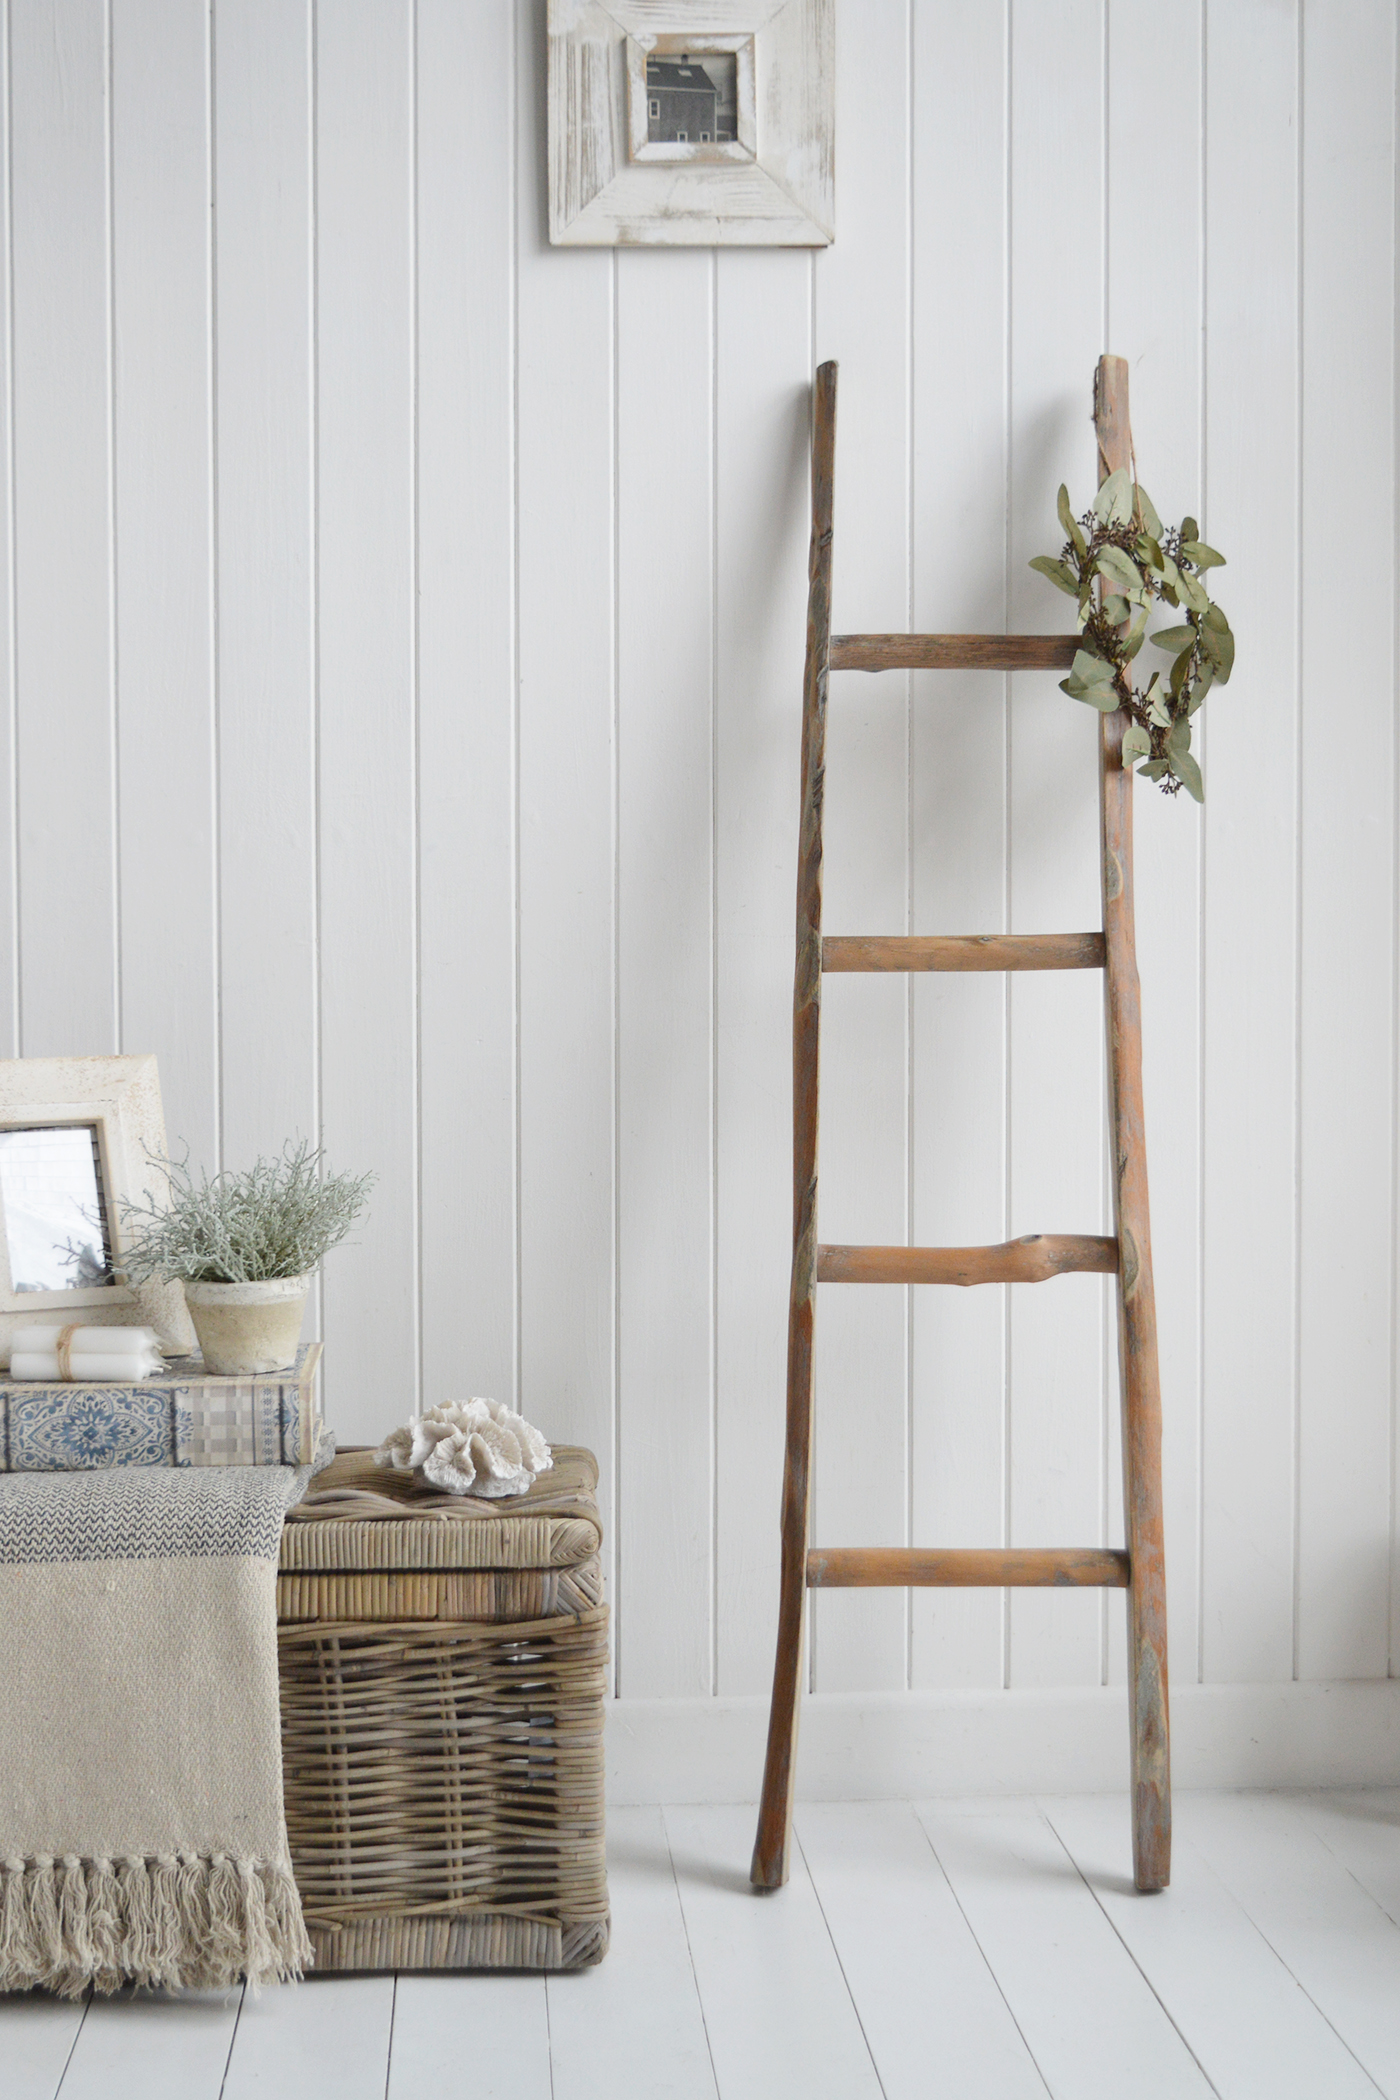 Driftwood Ladder - blankets display for a living room in a New England style interior, ideal in coastal and country homes.